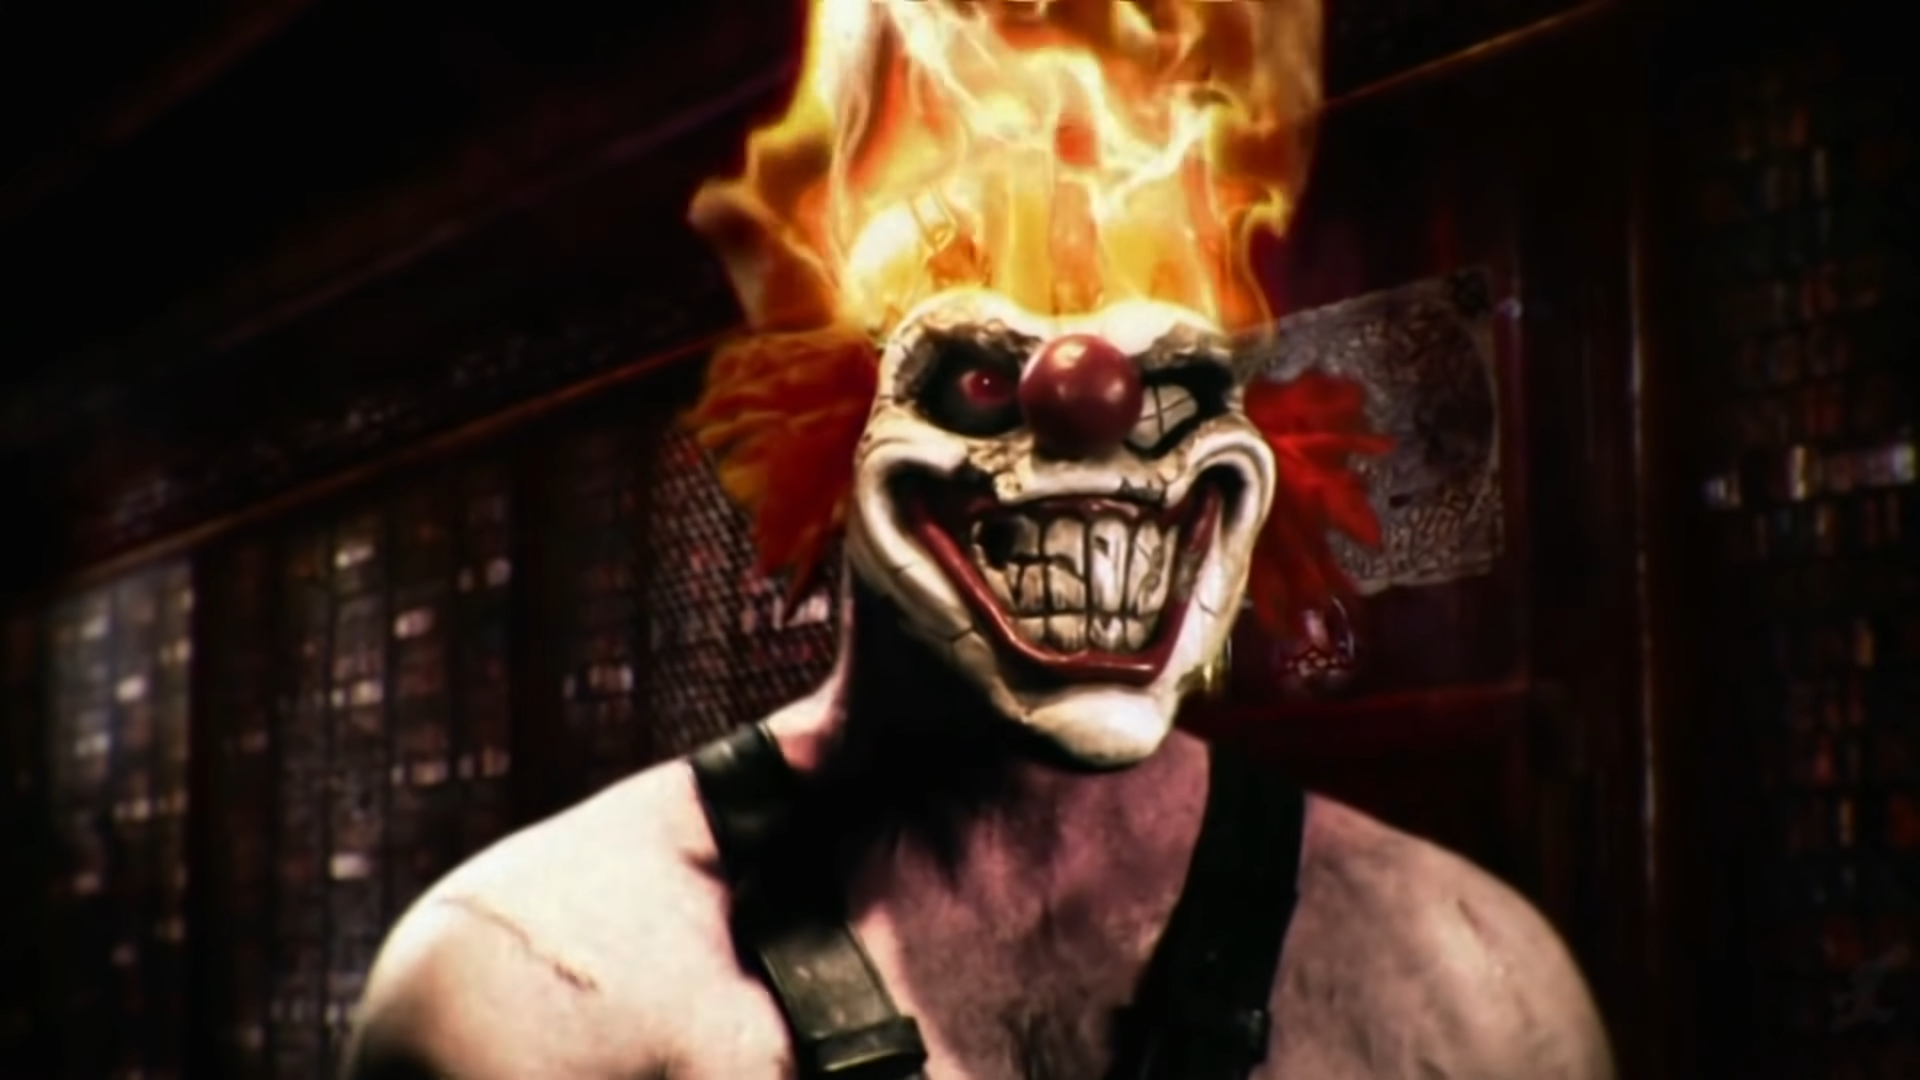 Twisted Metal TV Show Is A Huge Hit For Peacock, Apparently - GameSpot